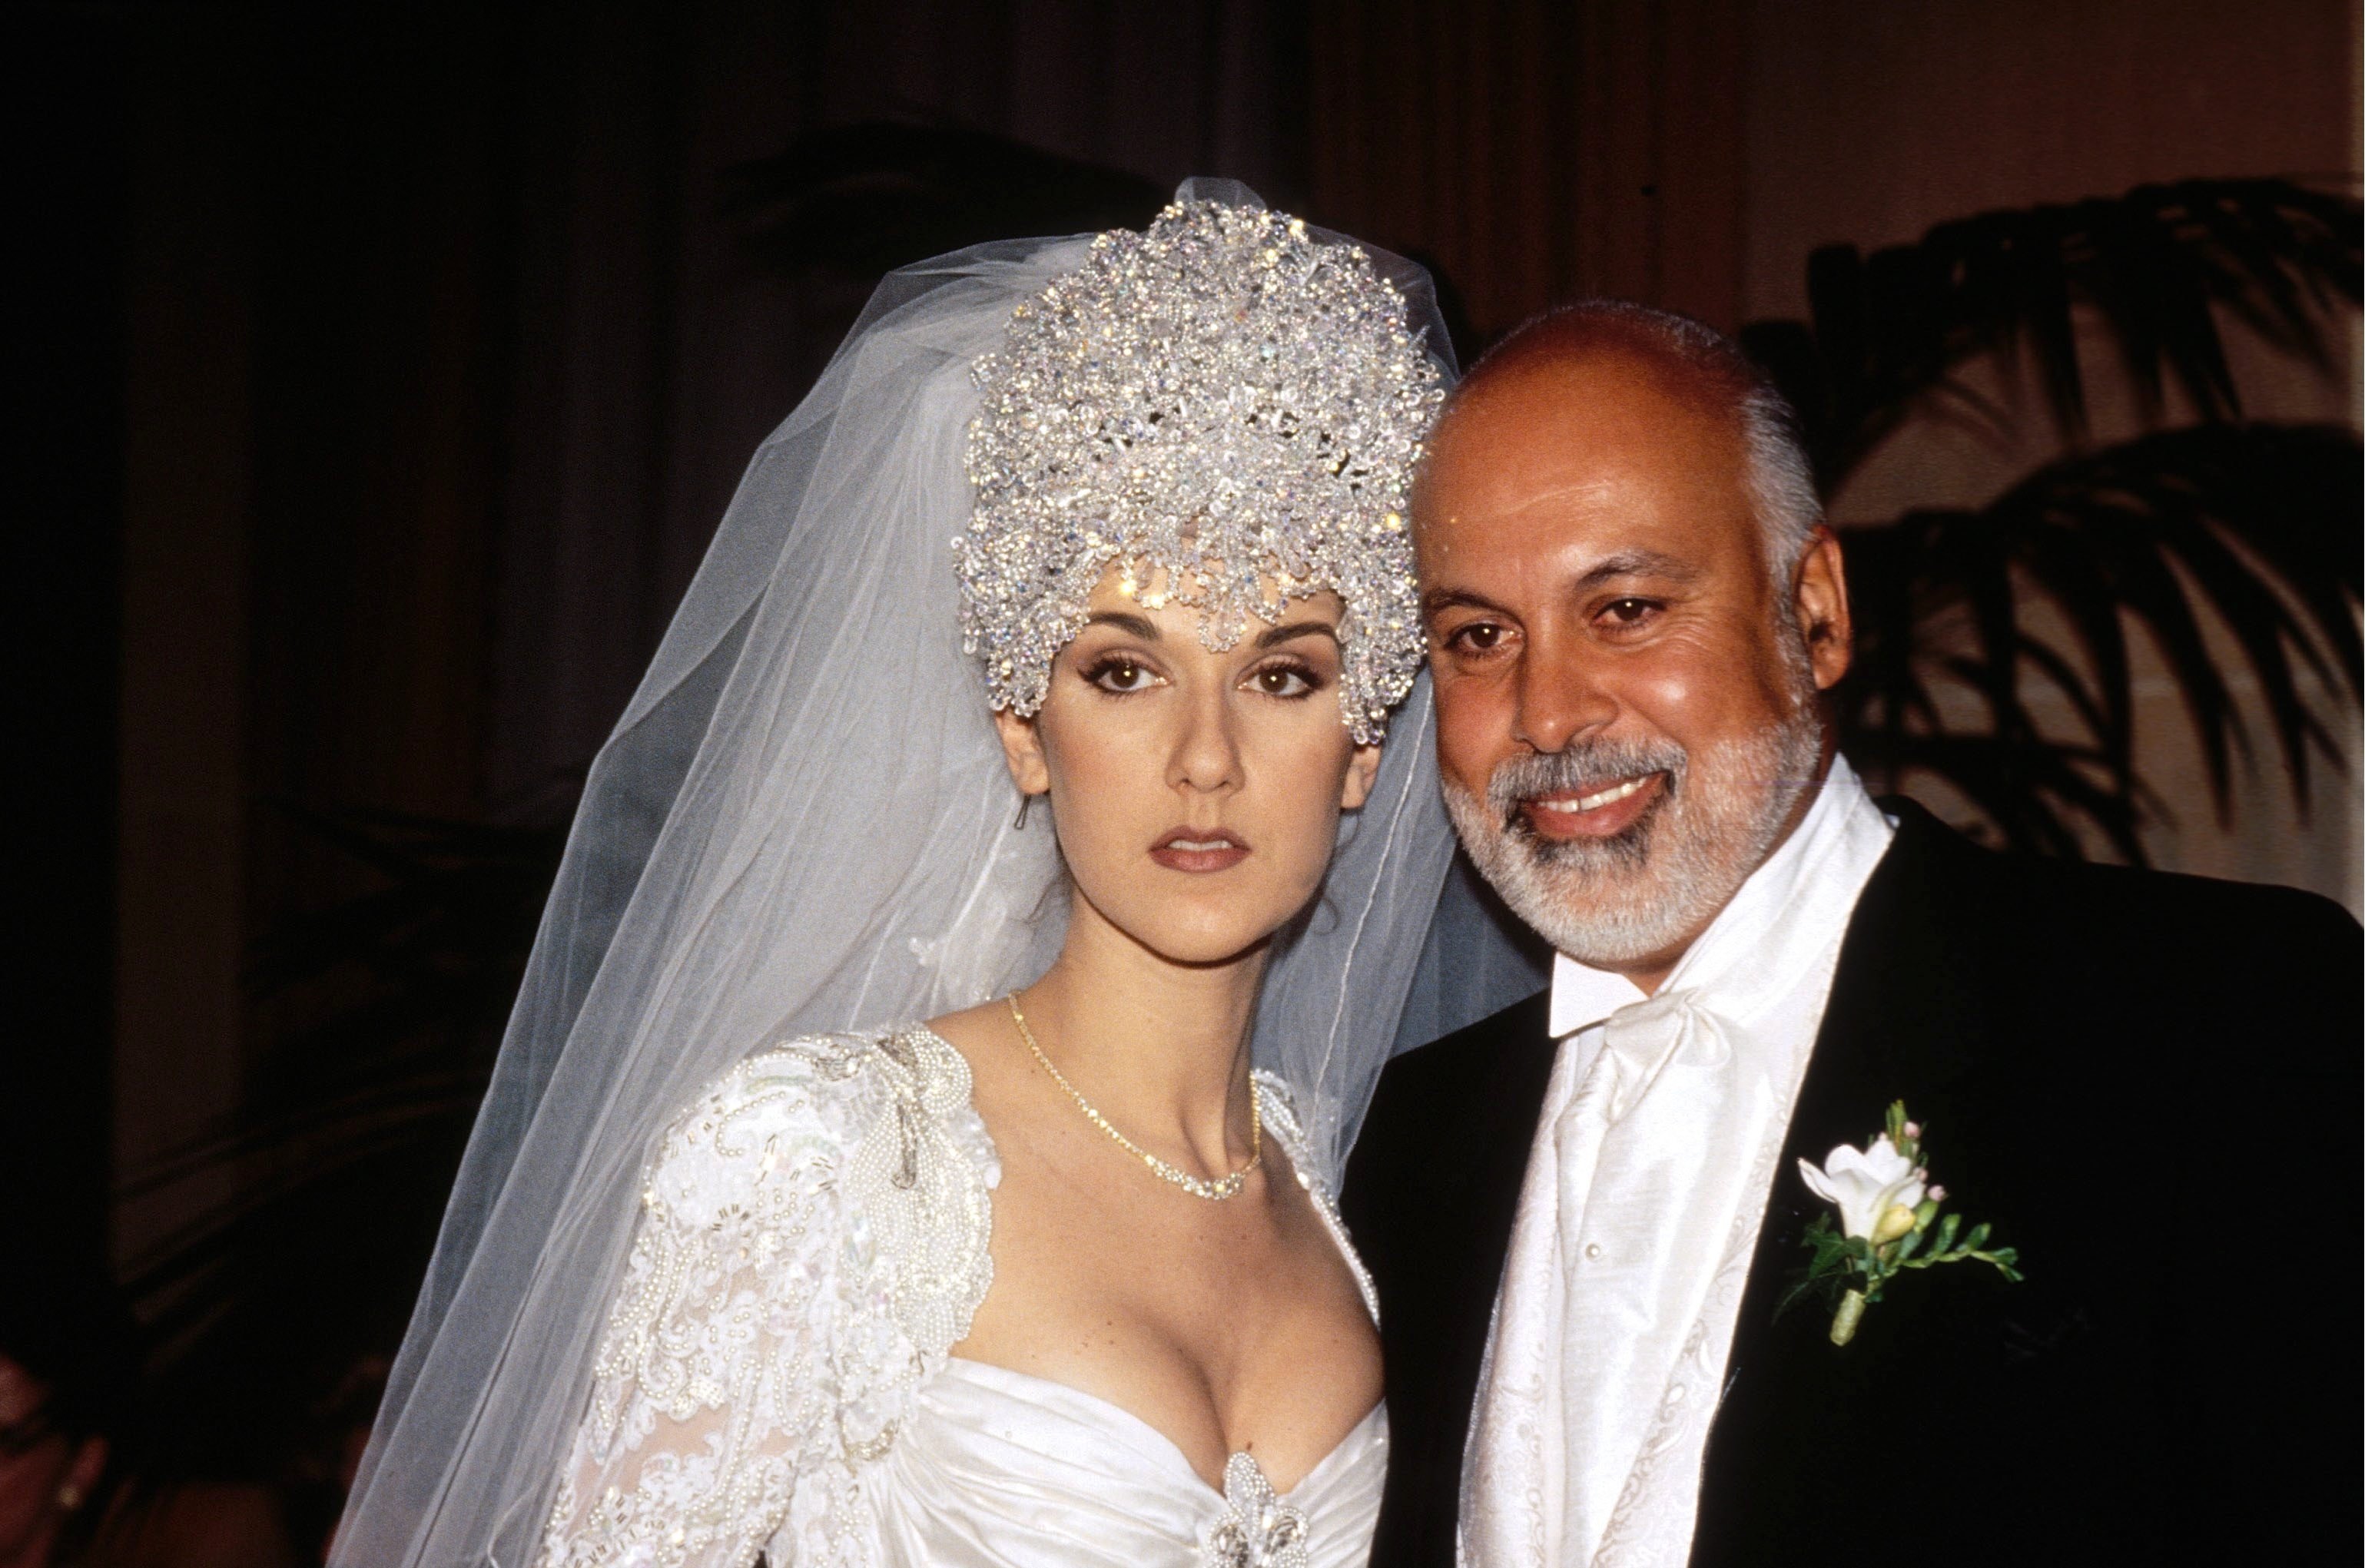 Celine Dion In Montreal, Canada In May, 1996-December, 17, 1994, during her wedding with Rene Angelil. | Source: Getty Images